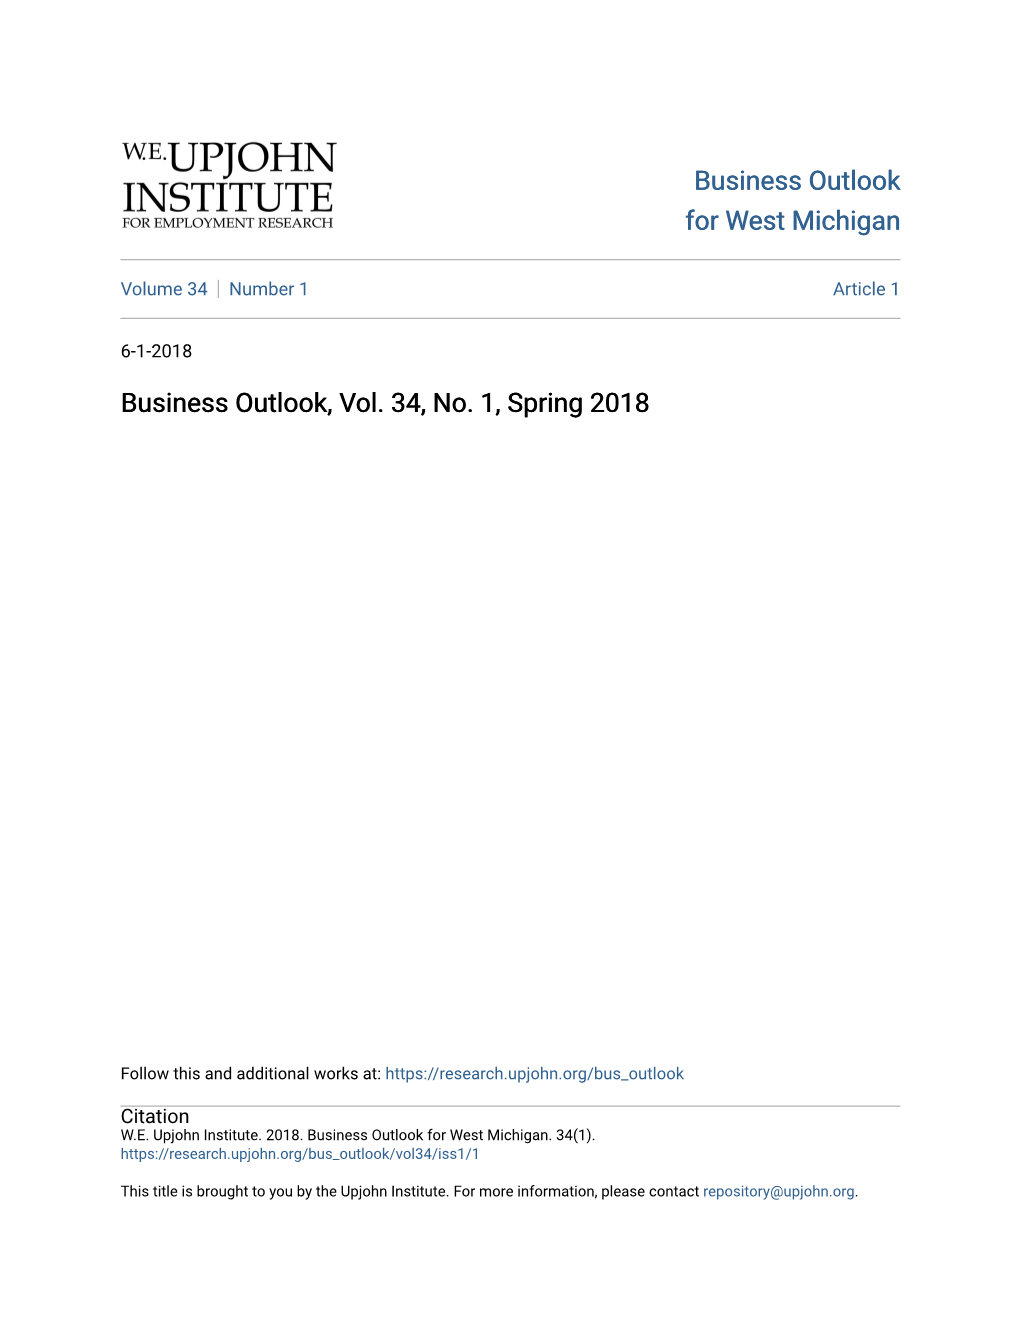 Business Outlook, Vol. 34, No. 1, Spring 2018